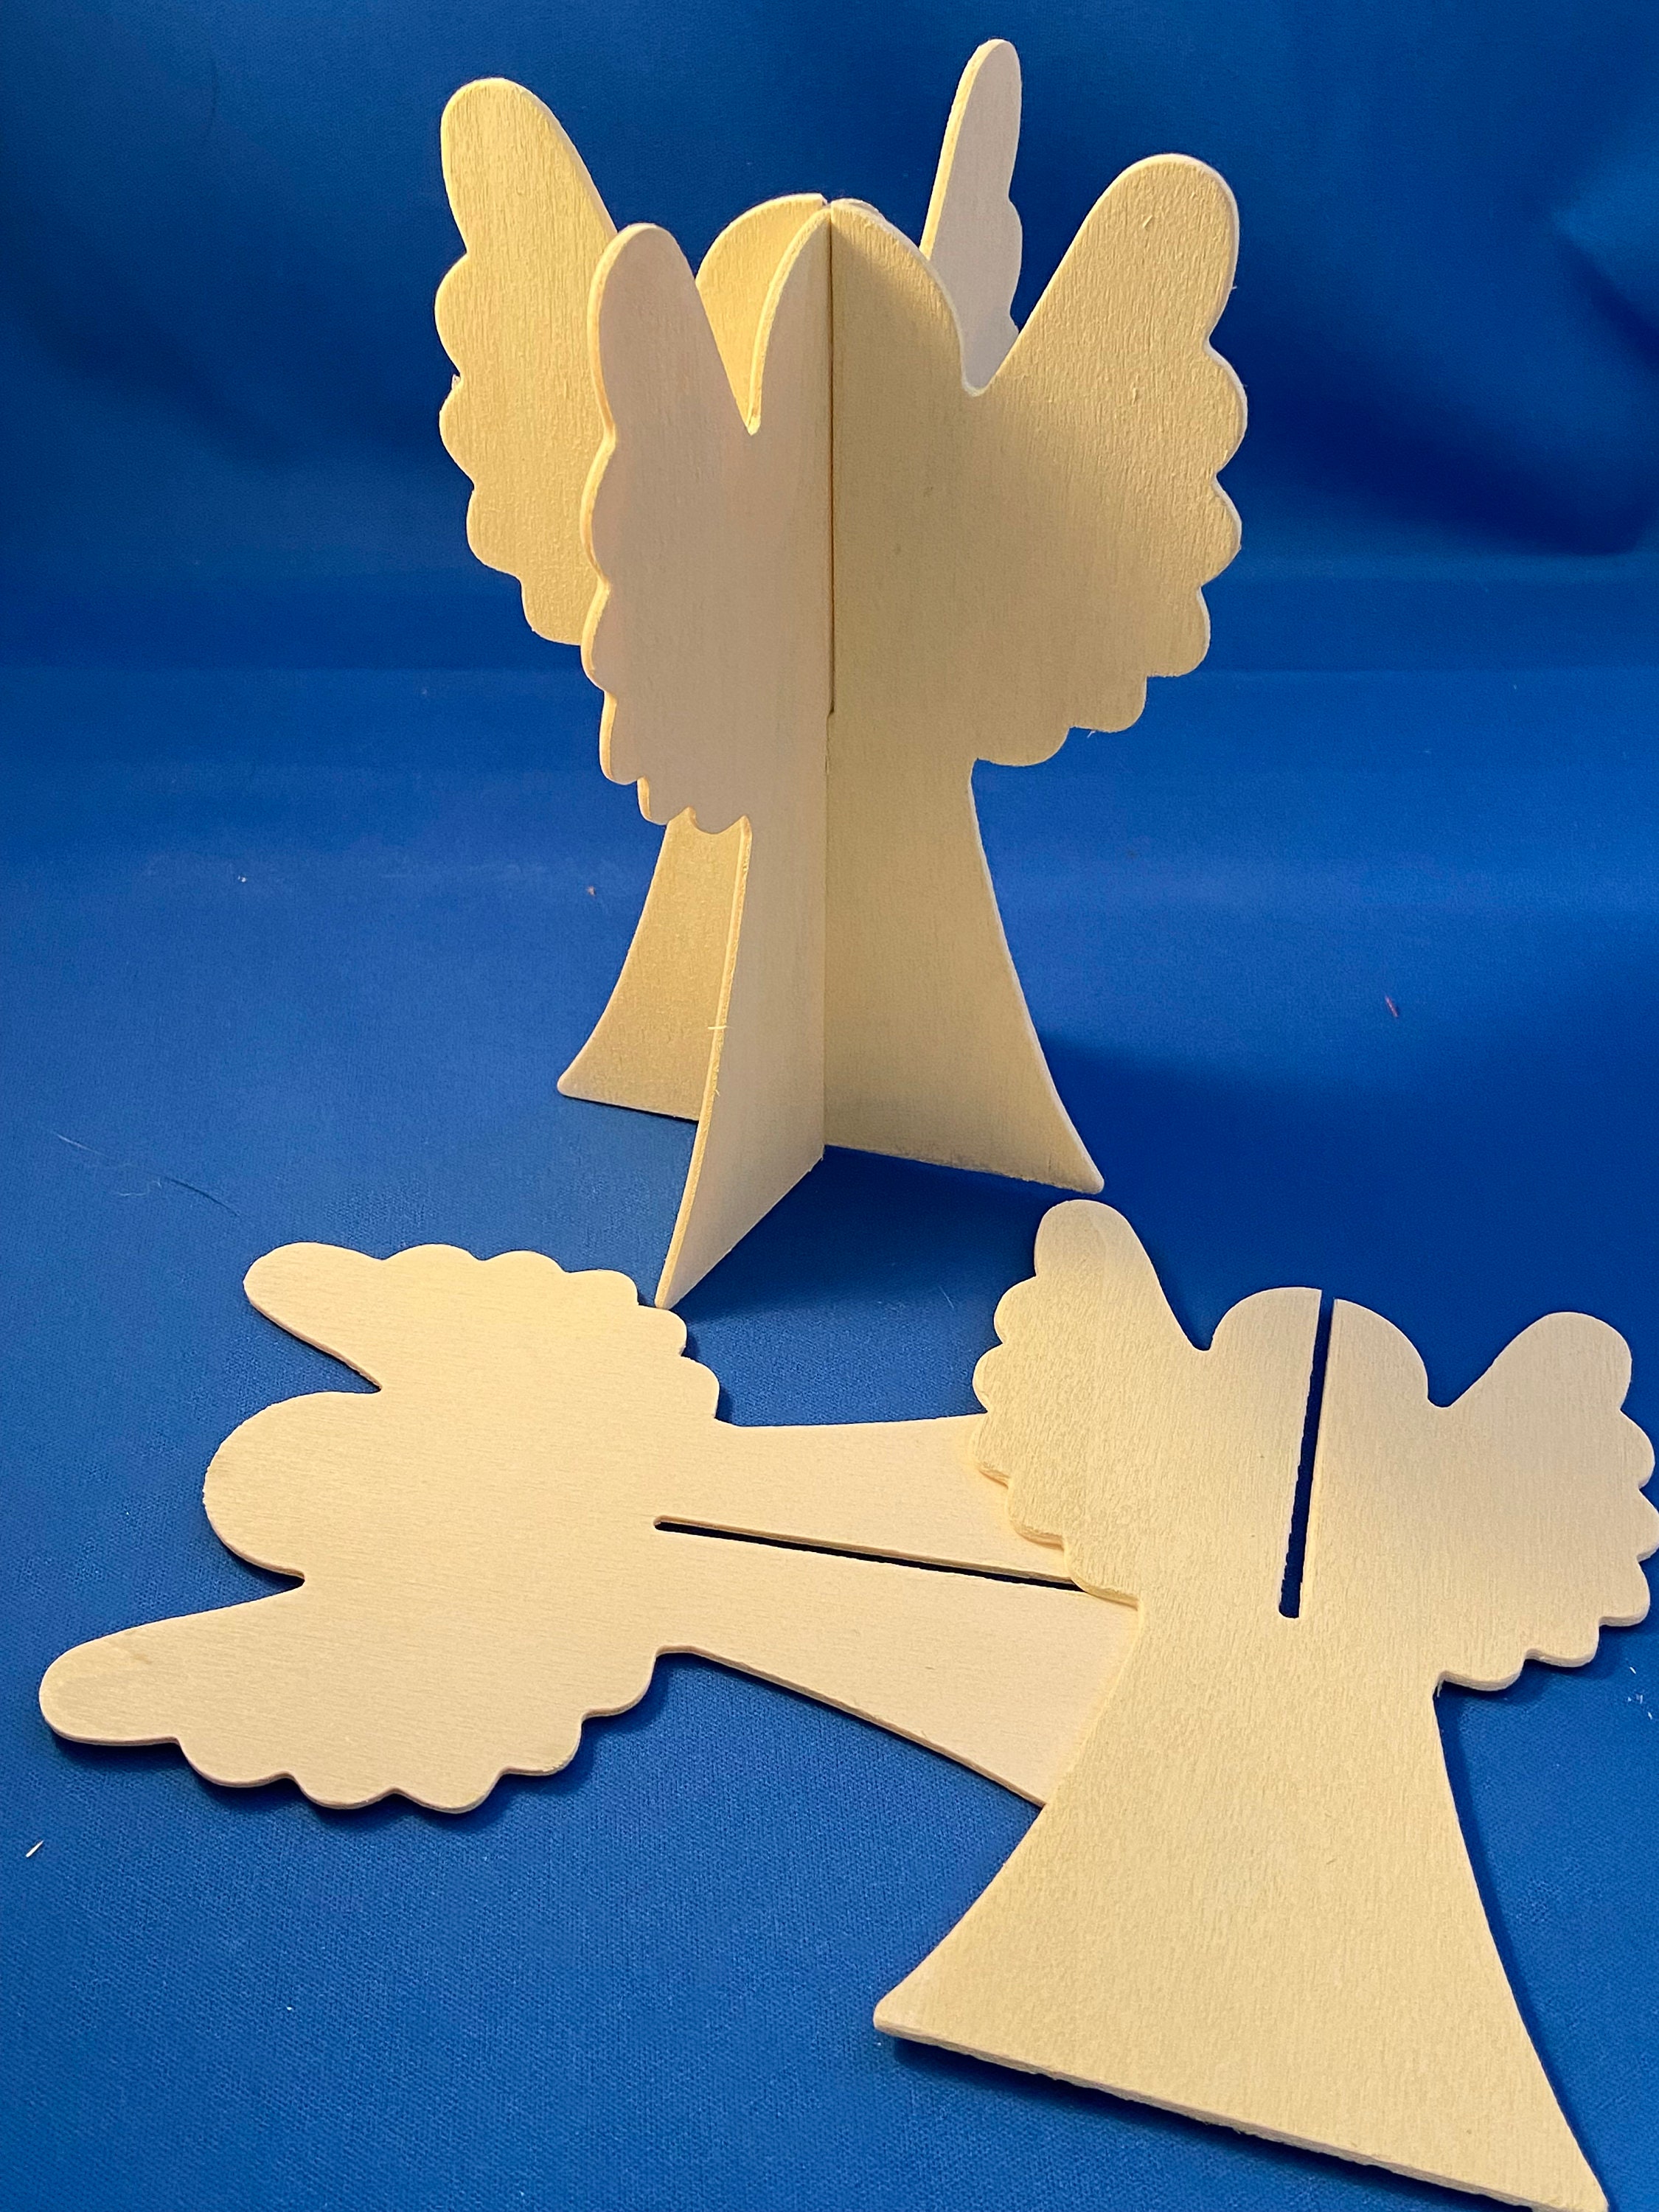 Angel Shape, MULTIPLE SIZES, Angel Cut Out, Wooden Shapes for Crafts and  Decorations, Wooden Angel Cutouts, Christmas Cut Out Shapes 